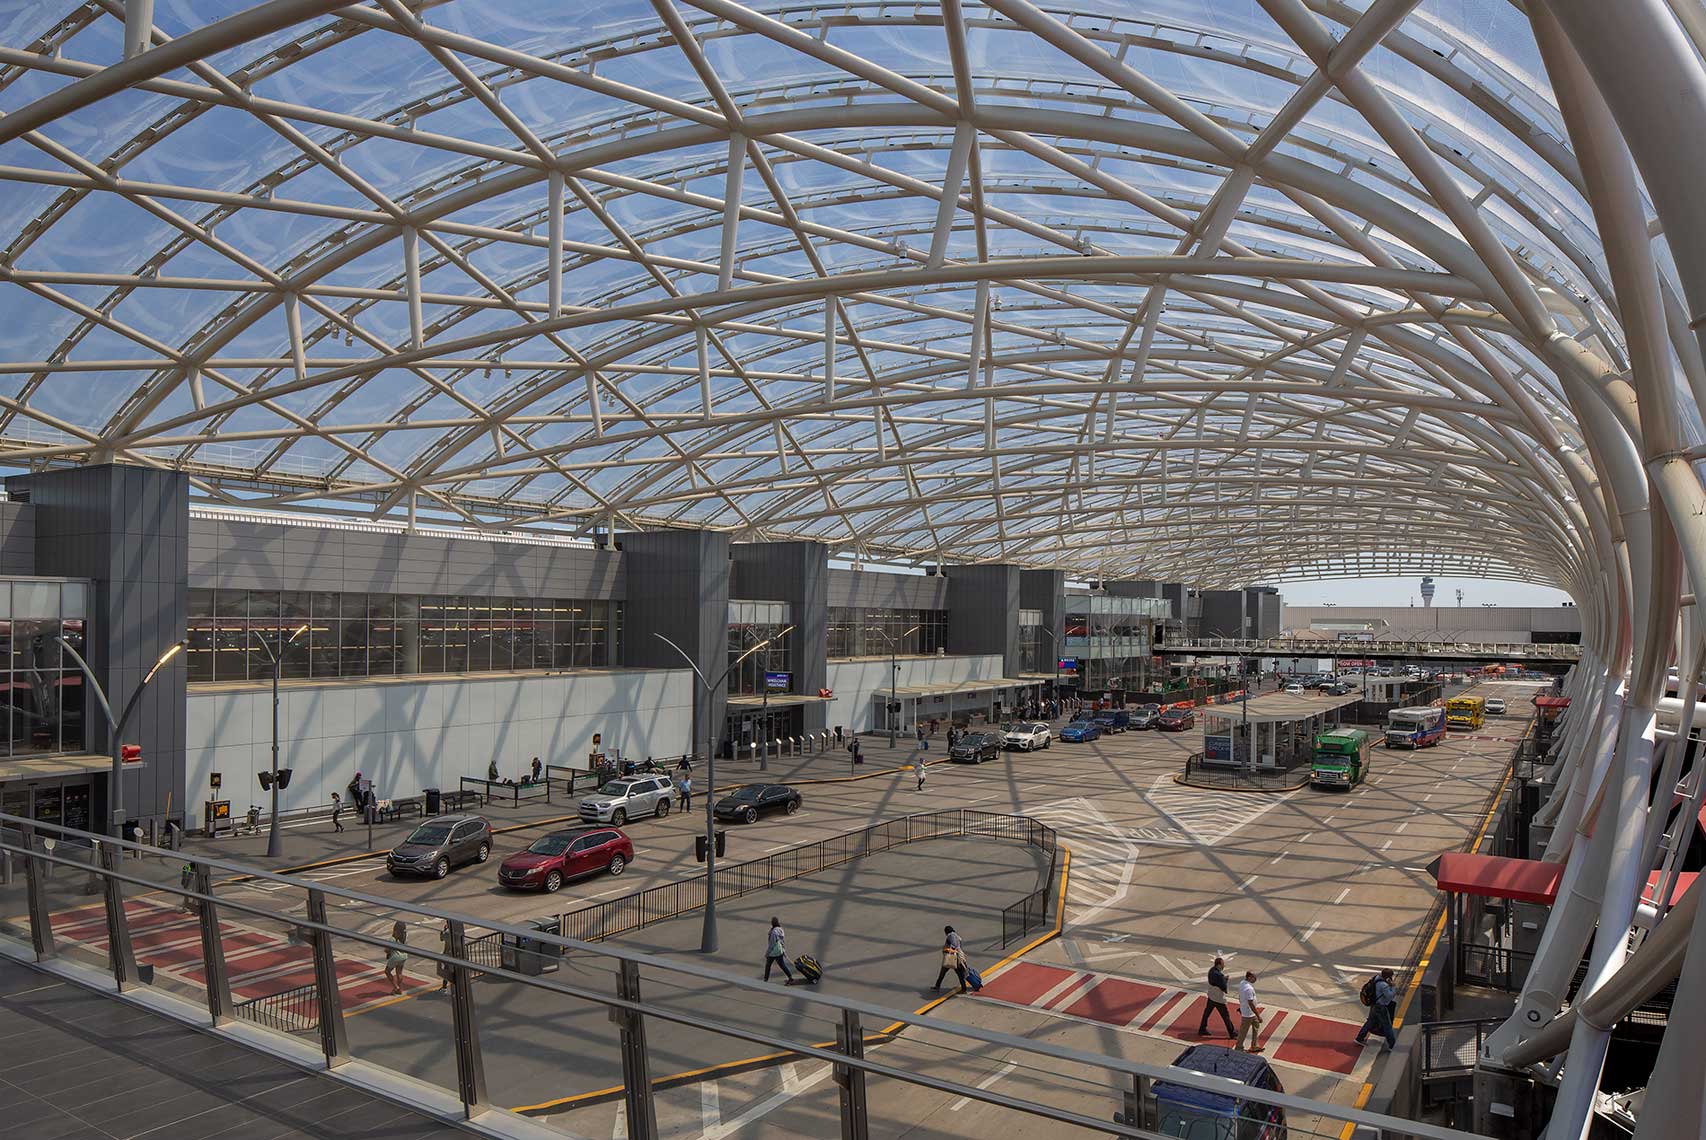 An image of the canopies covering the passenger dropoff area from the pedestrian bridge at Hartsfield